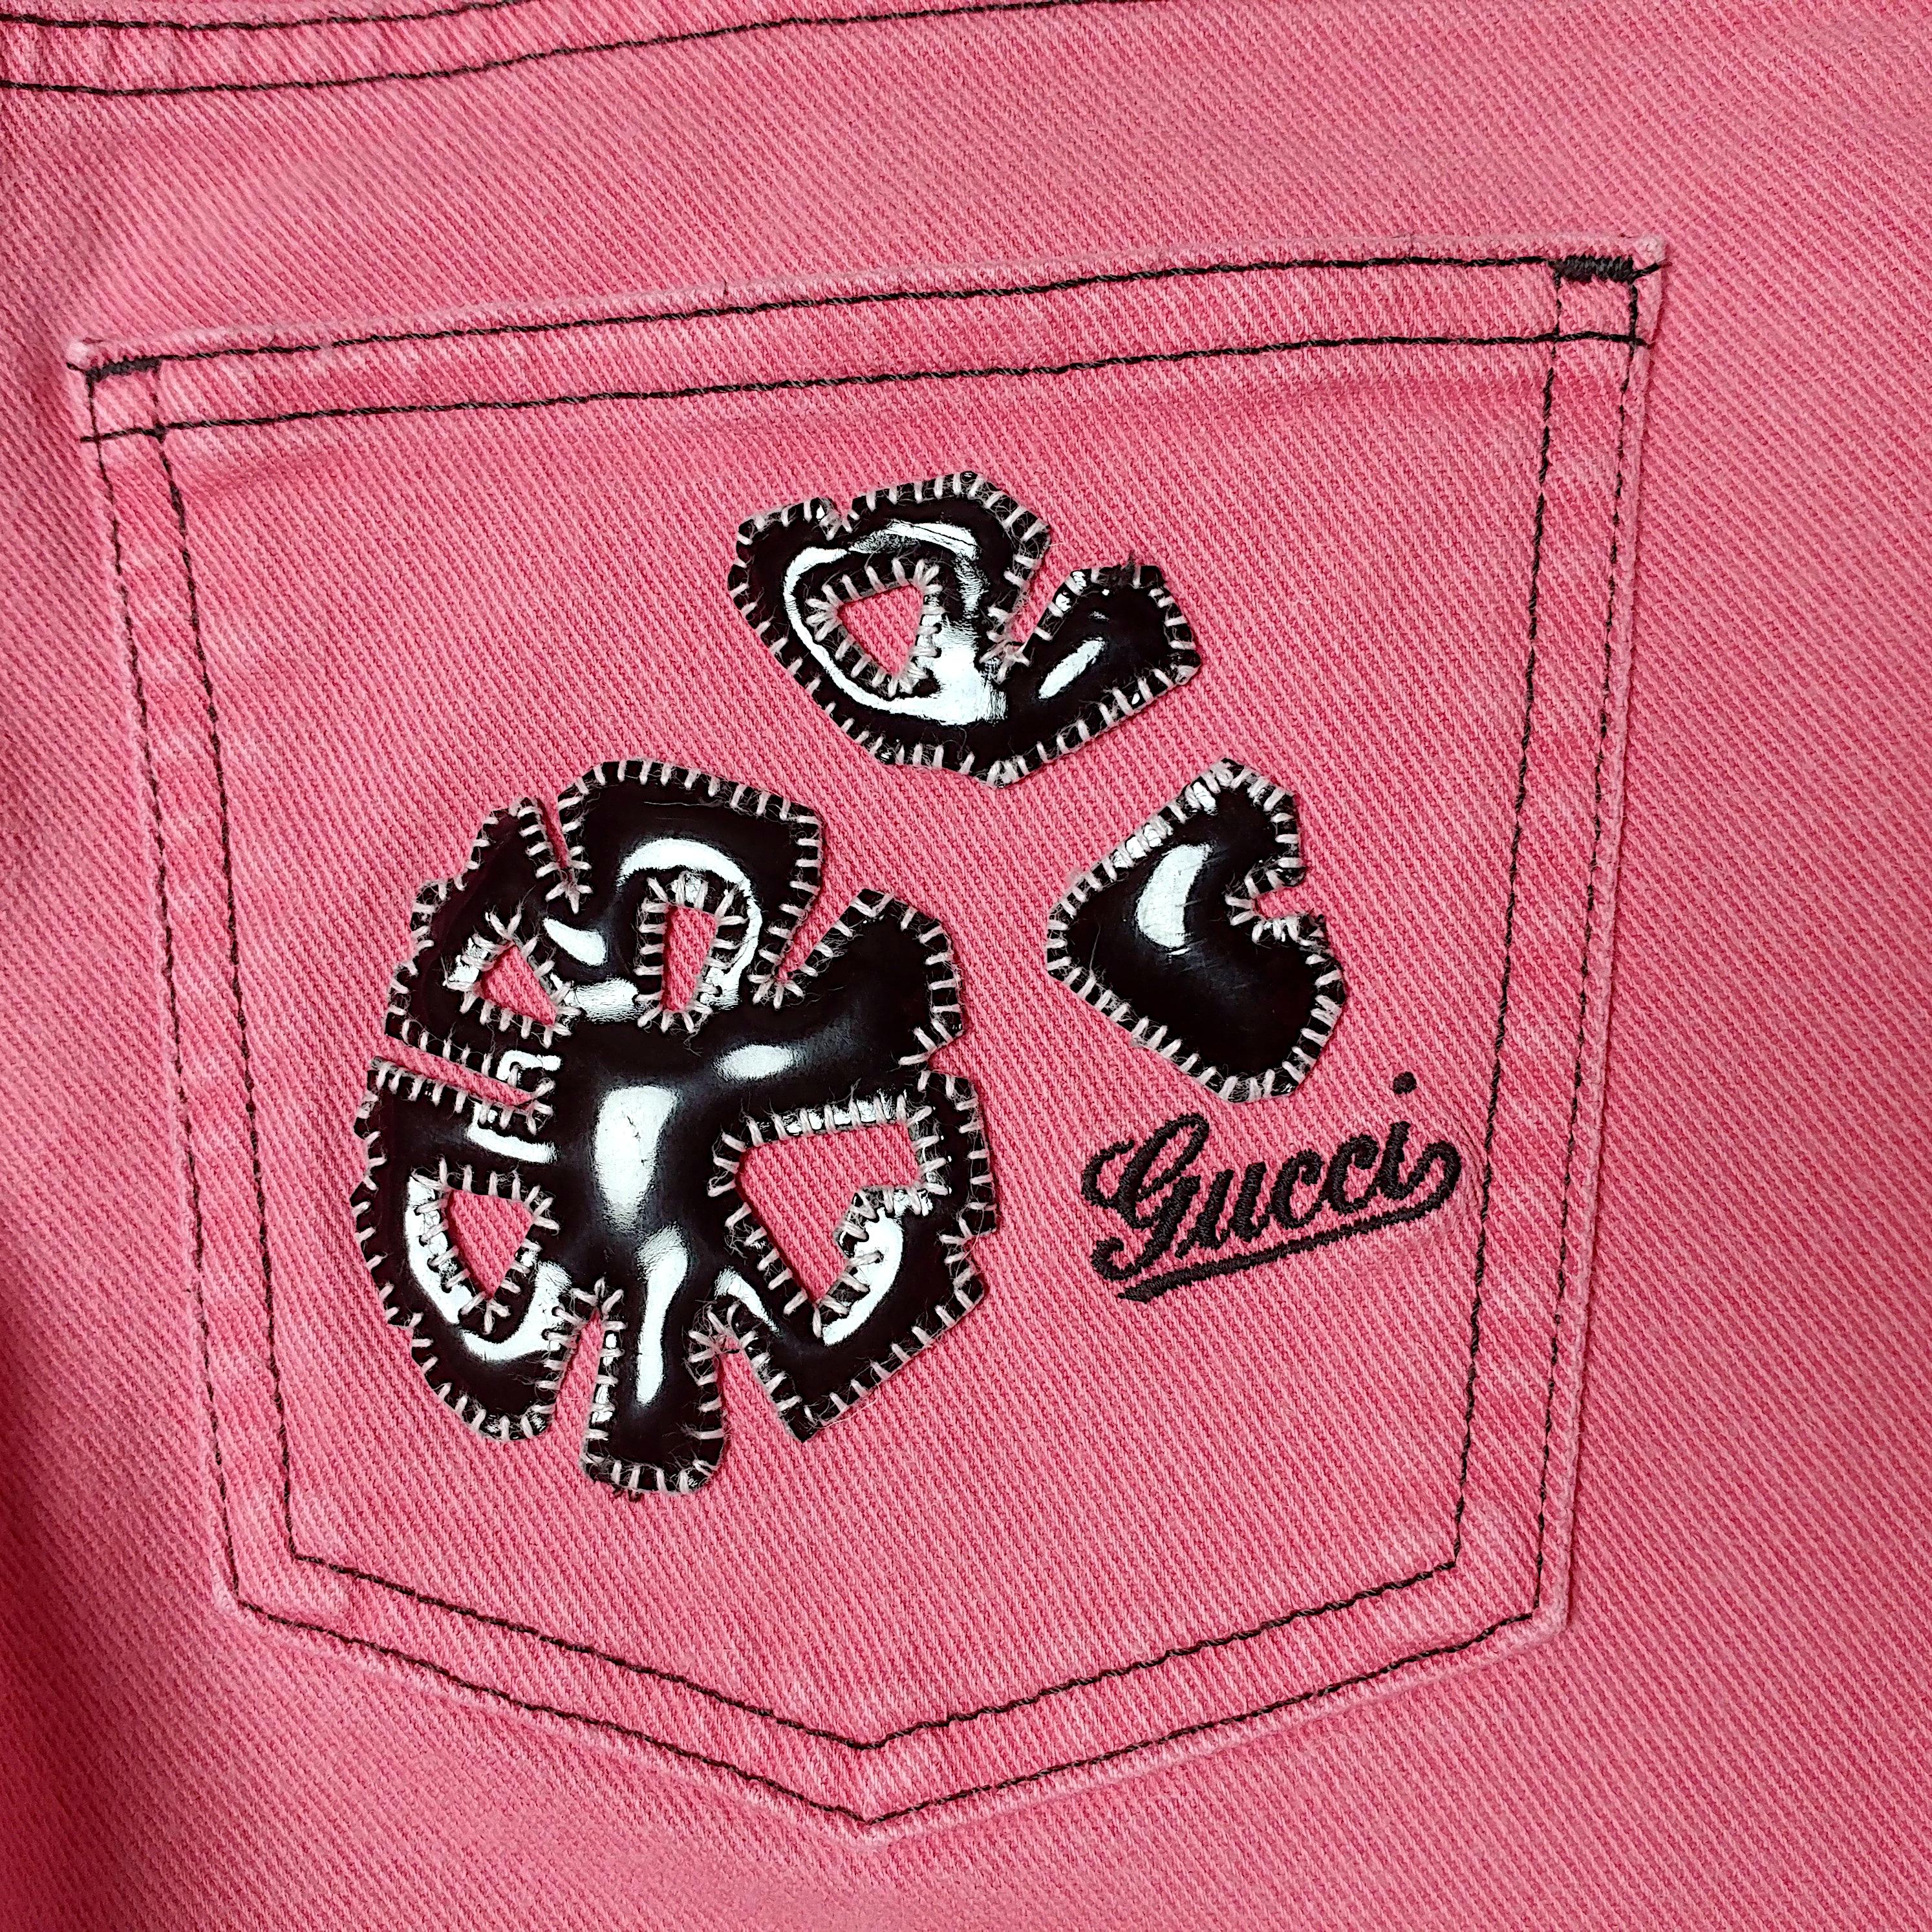 GUCCI - Vintage Pink Jeans with Black Stitchings and Patches  Size 6US 38EU 6